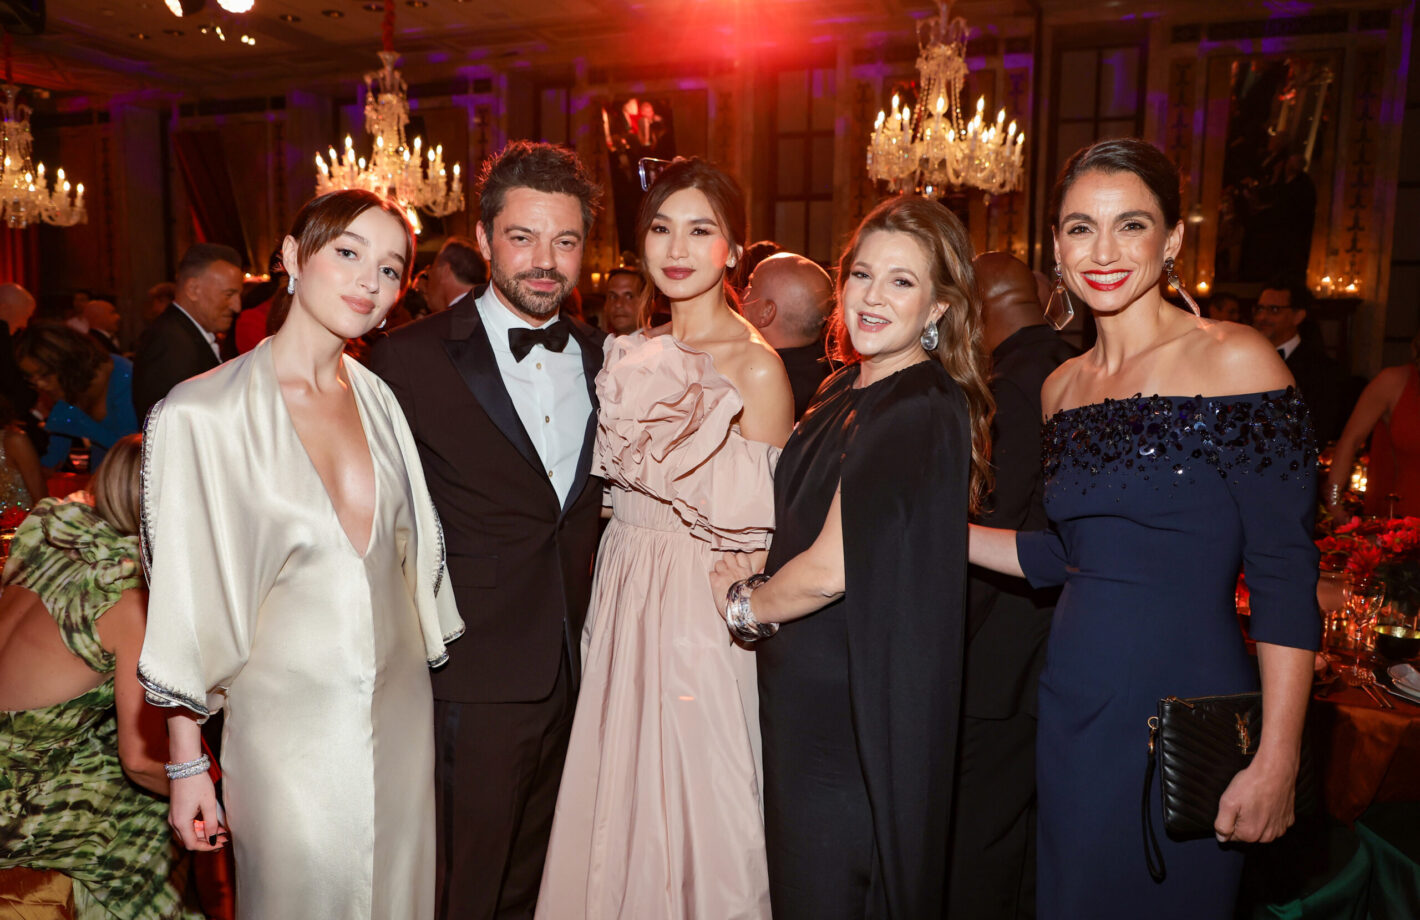 Phoebe Dynevor, Dominic Cooper, Gemma Chan, Drew Barrymore and Demetra Pinsent attend the Clooney Foundation For Justice Inaugural Albie Awards at New York Public Library on September 29, 2022 in New York City.